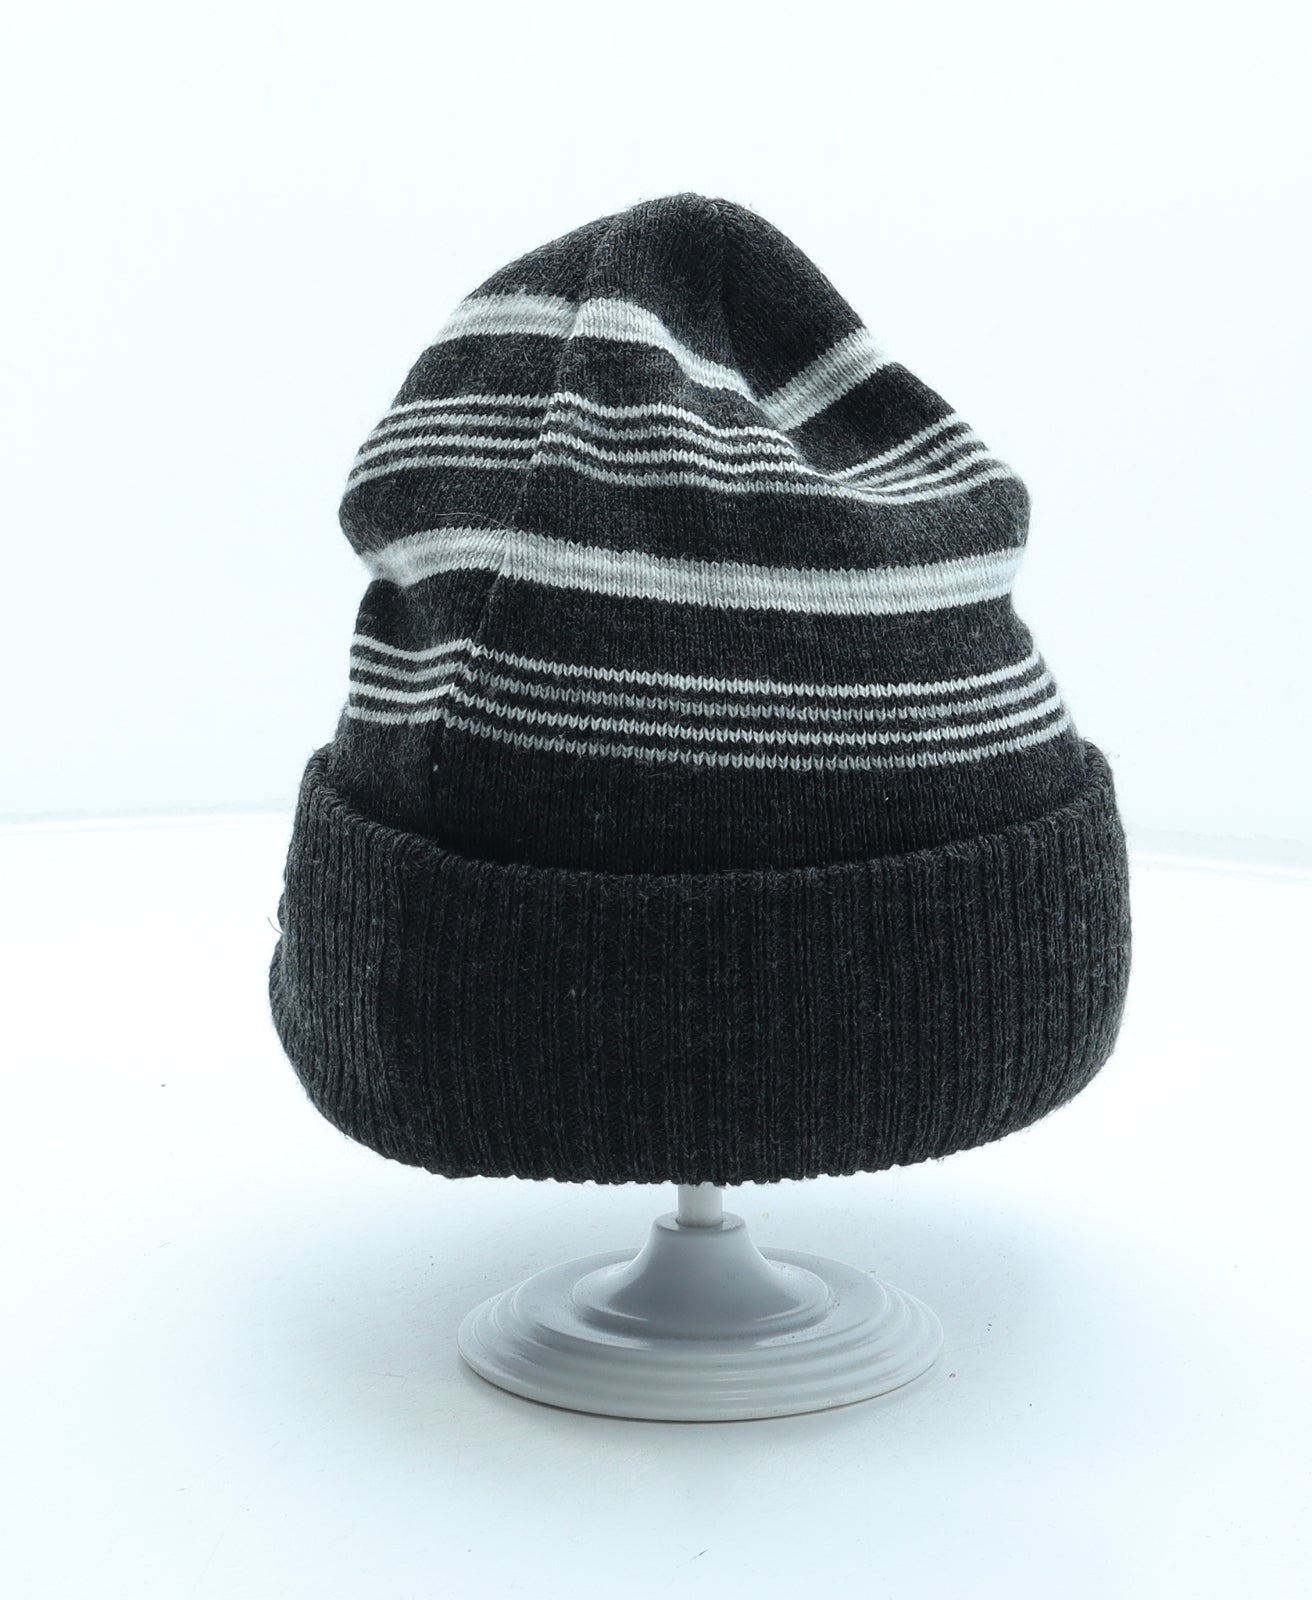 Preworn Mens Grey Striped Acrylic Beanie One Size - Peaked front